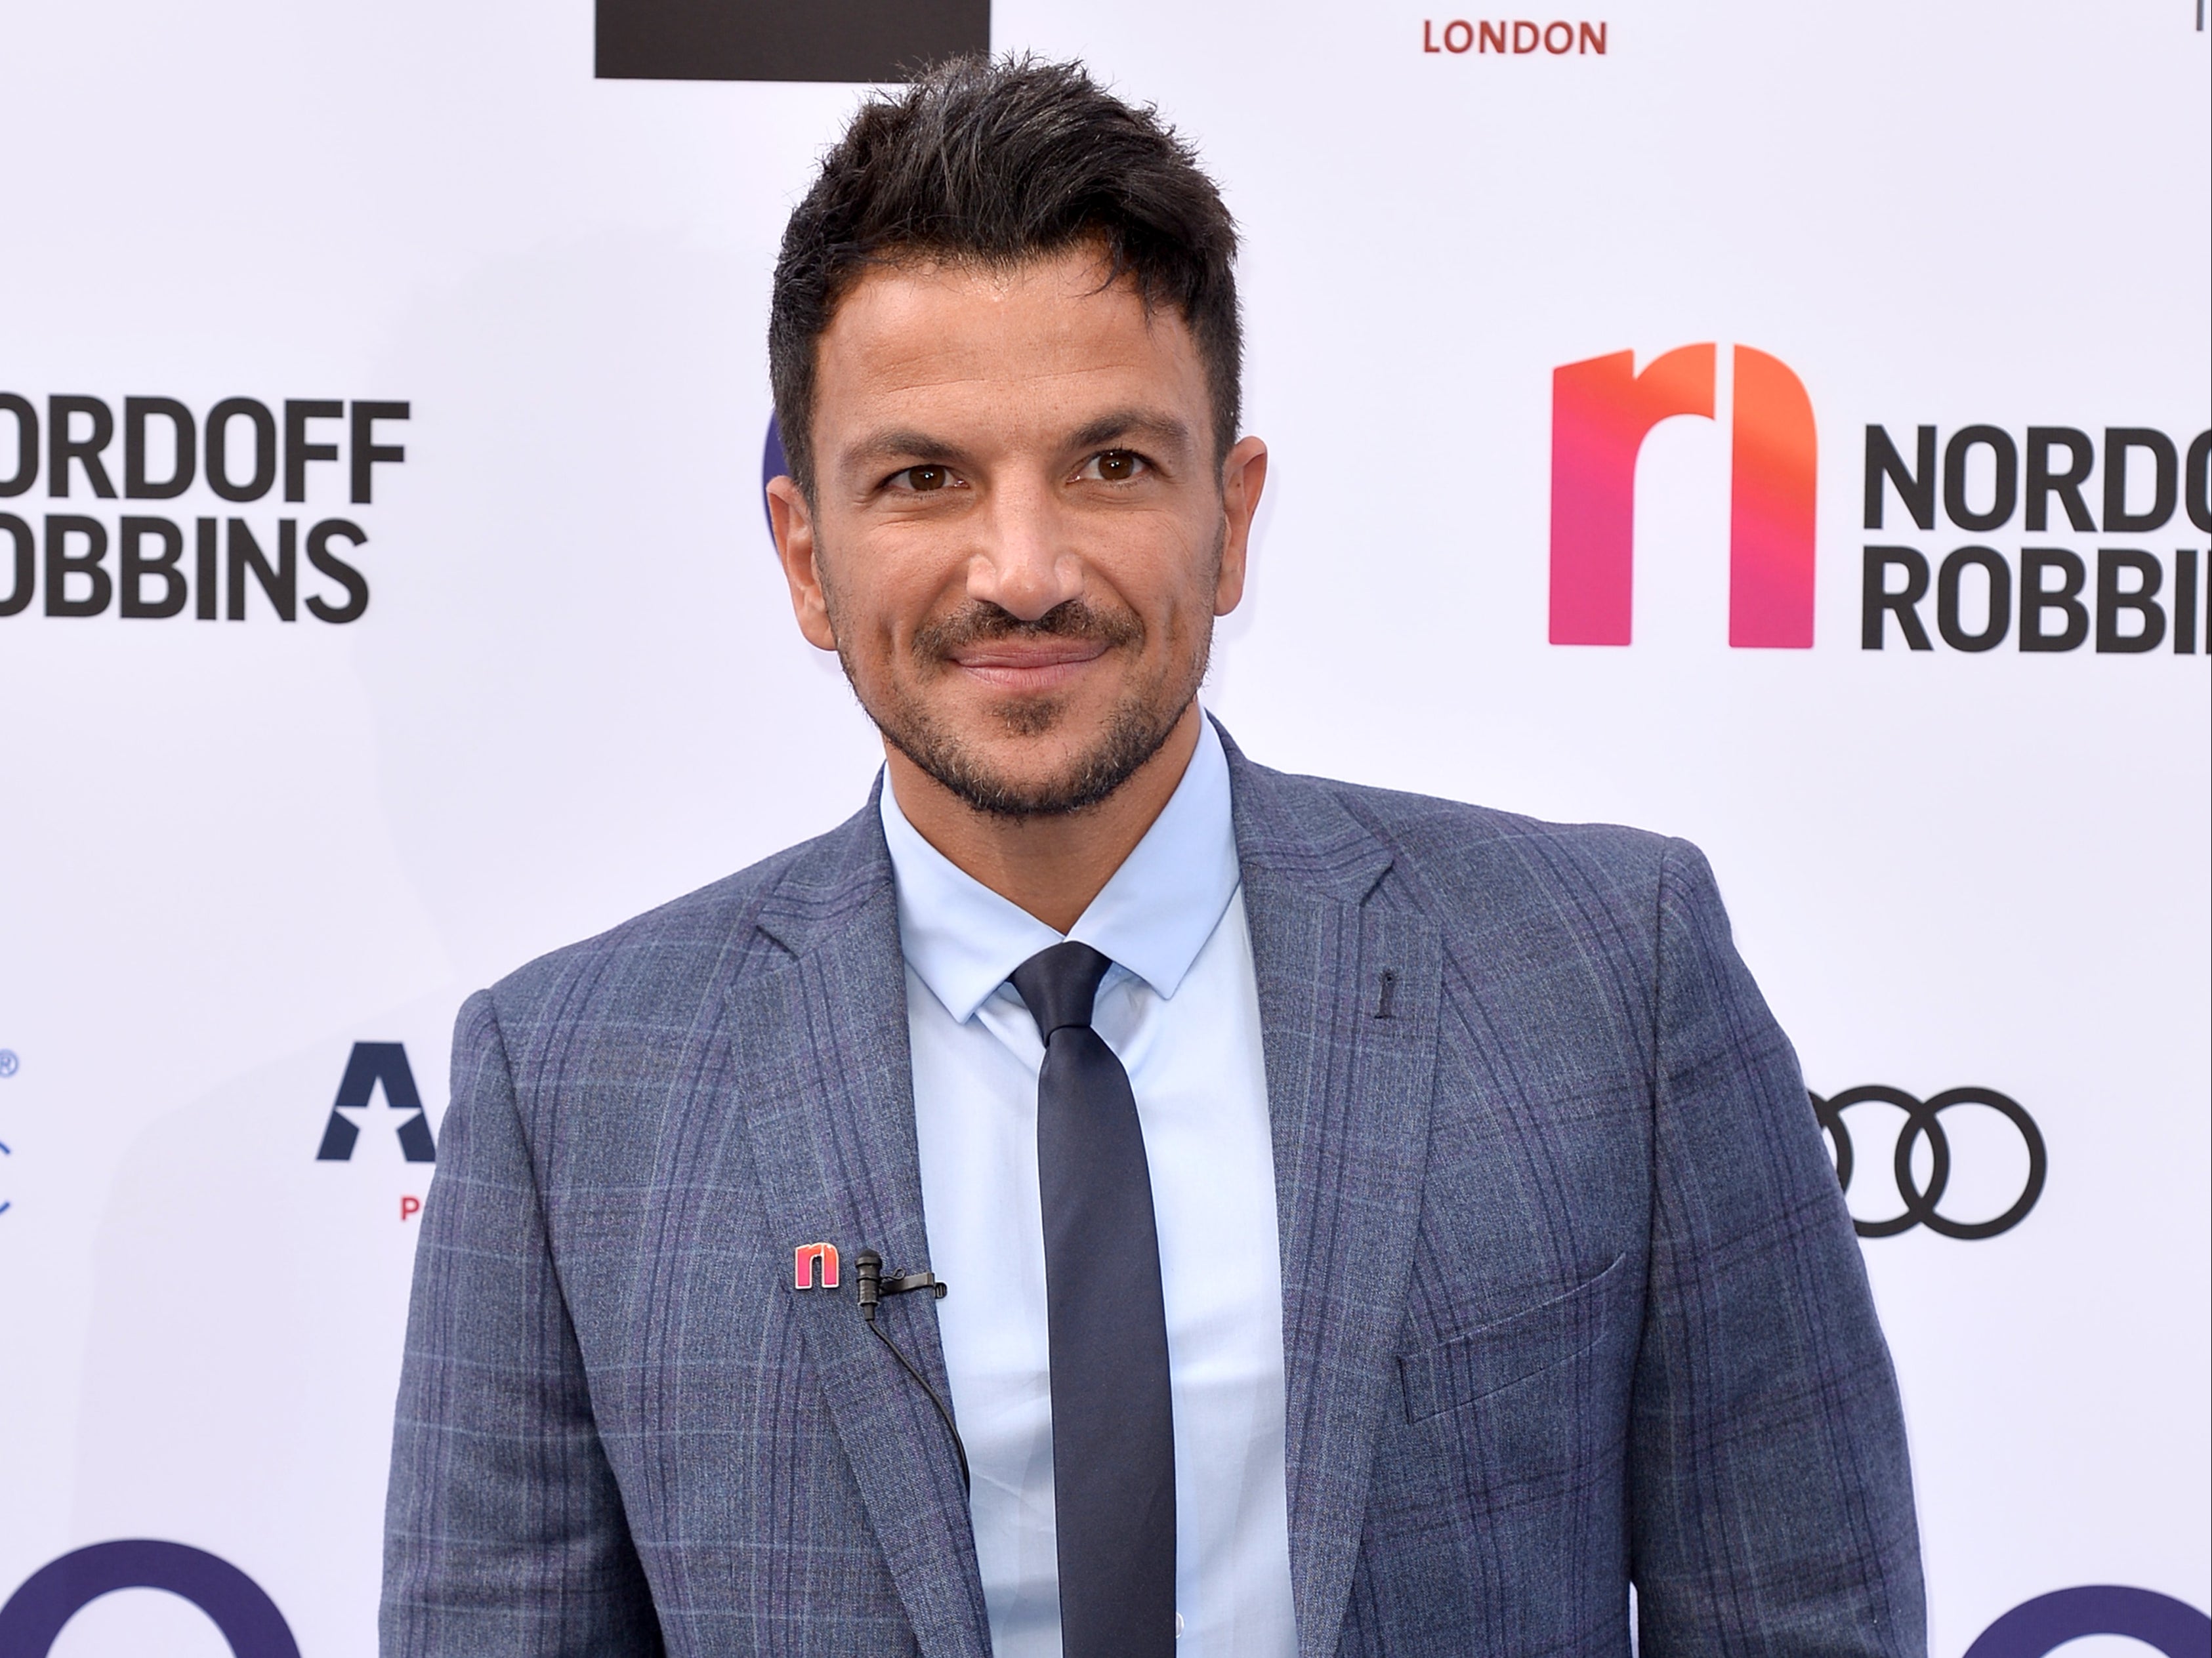 Peter Andre in 2019